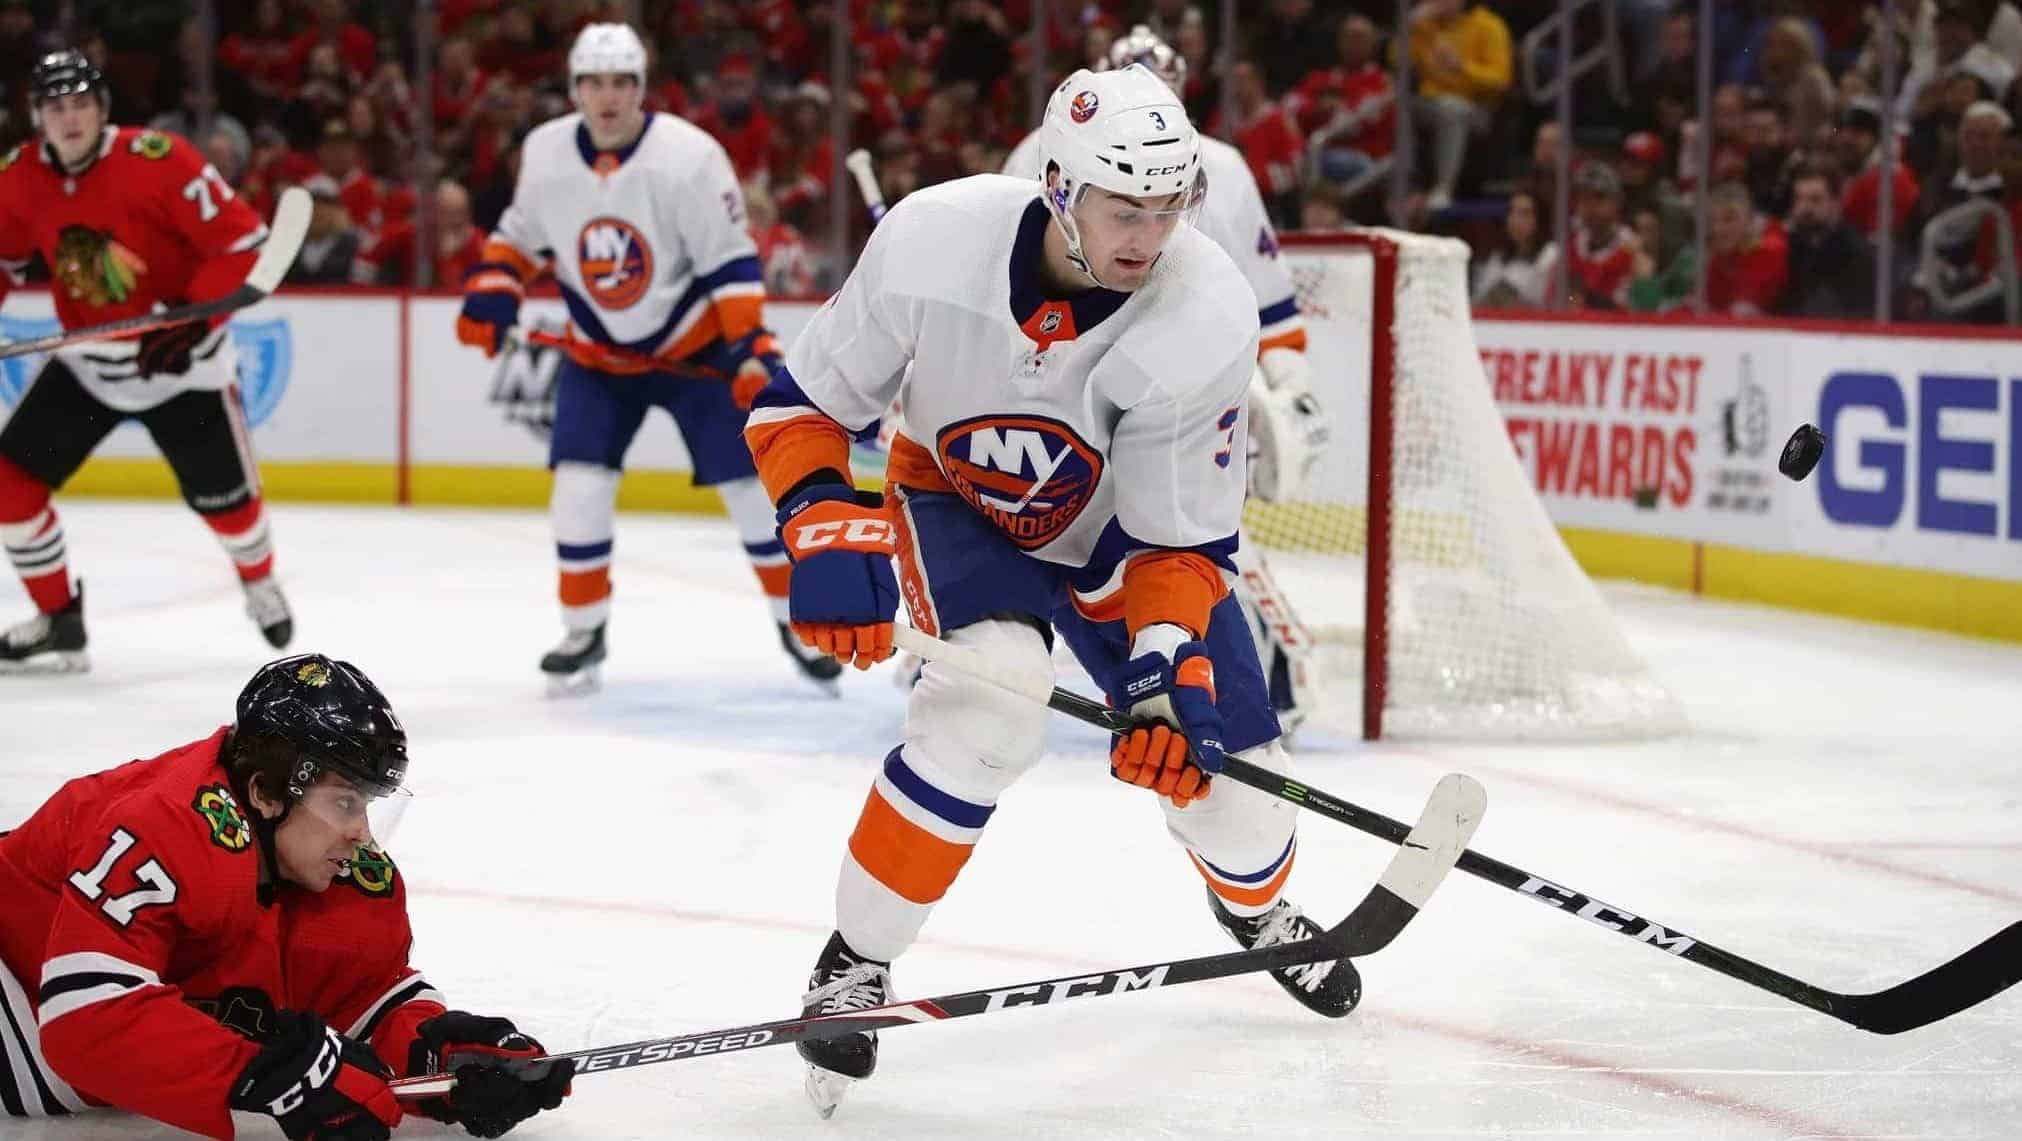 CHICAGO, ILLINOIS - DECEMBER 27: Dylan Strome #17 of the Chicago Blackhawks hits the ice as he knocks the puck away from Adam Pelech #3 of the New York Islanders at the United Center on December 27, 2019 in Chicago, Illinois.